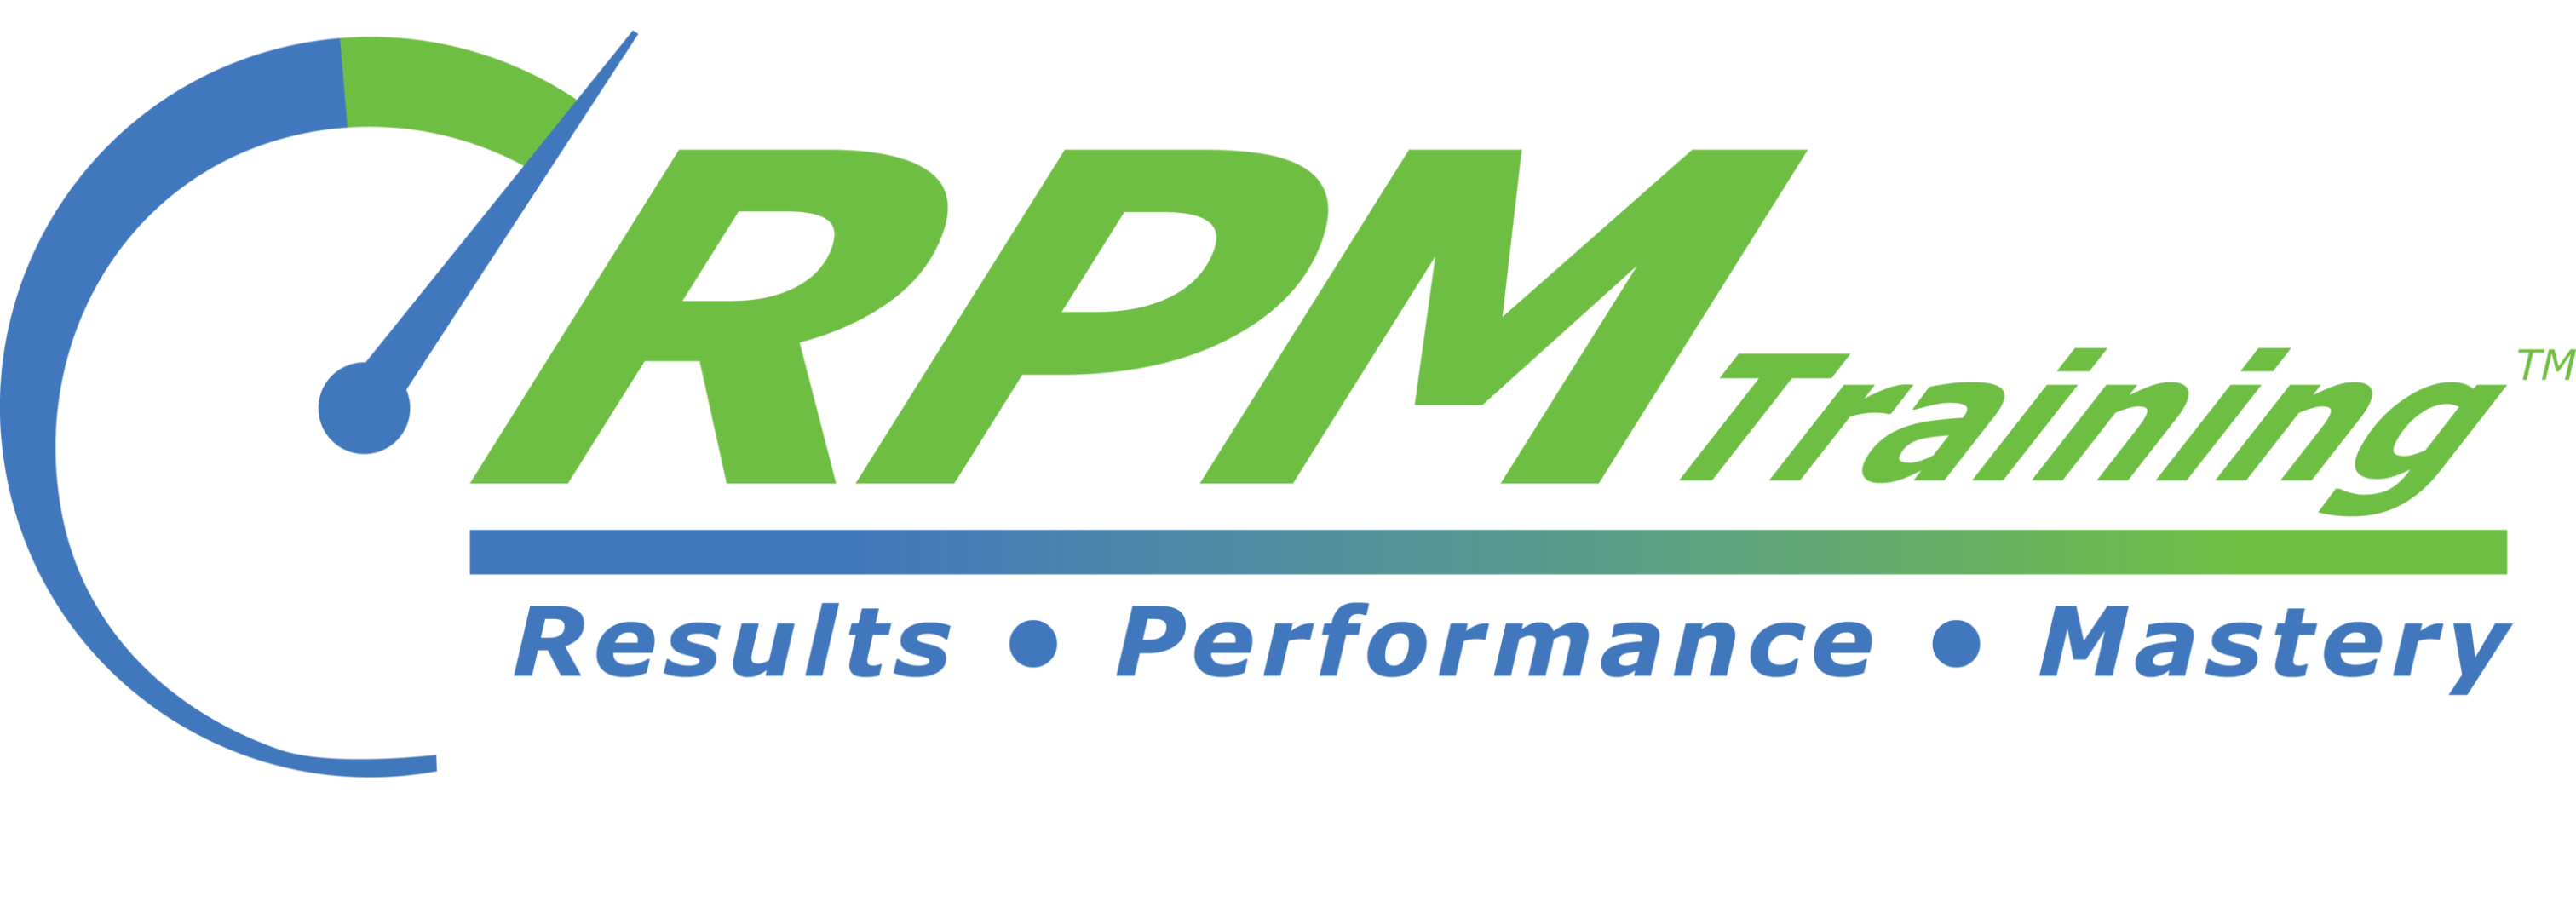 RPM Training has added a new RPM course starting 